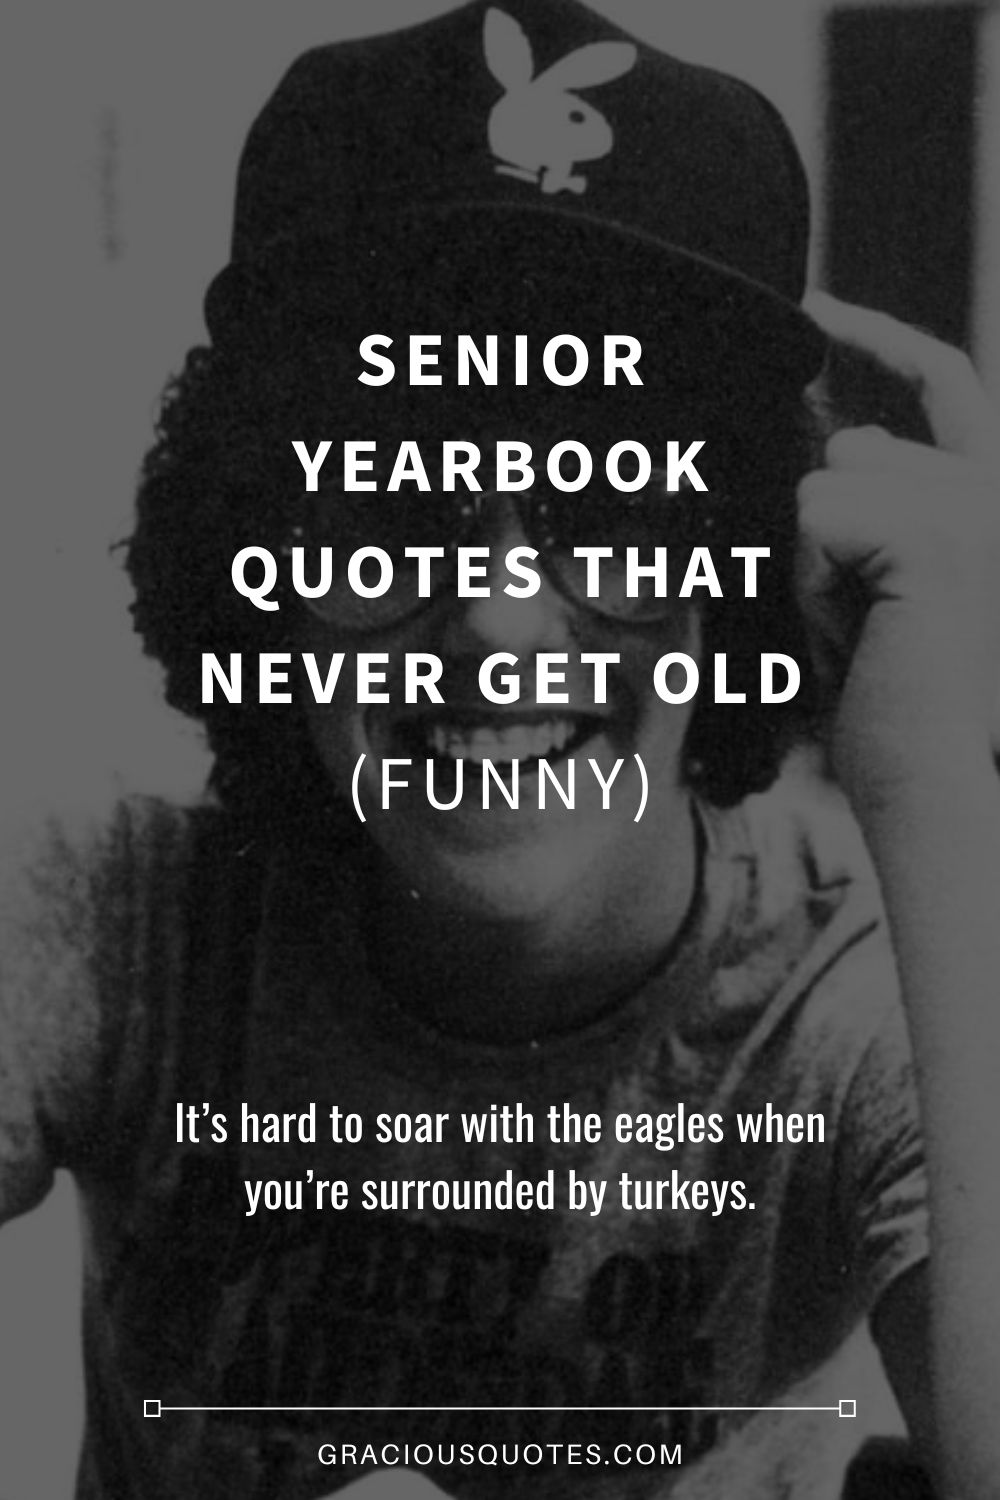 45 Senior Yearbook Quotes that Never Get Old (FUNNY) - Gracious Quotes